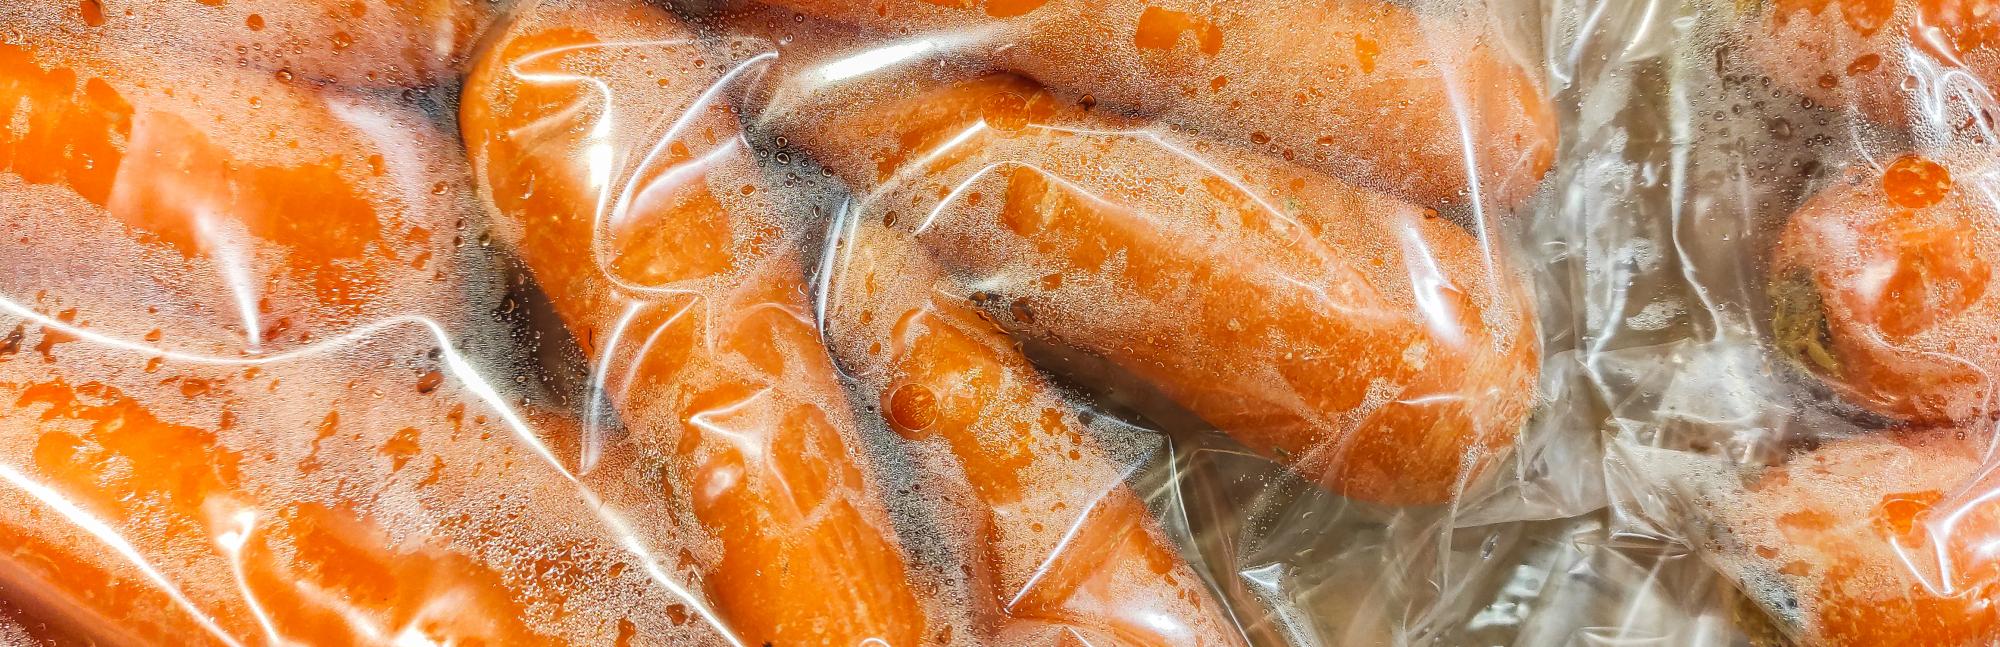 Carrots wrapped in flexible plastic packaging 